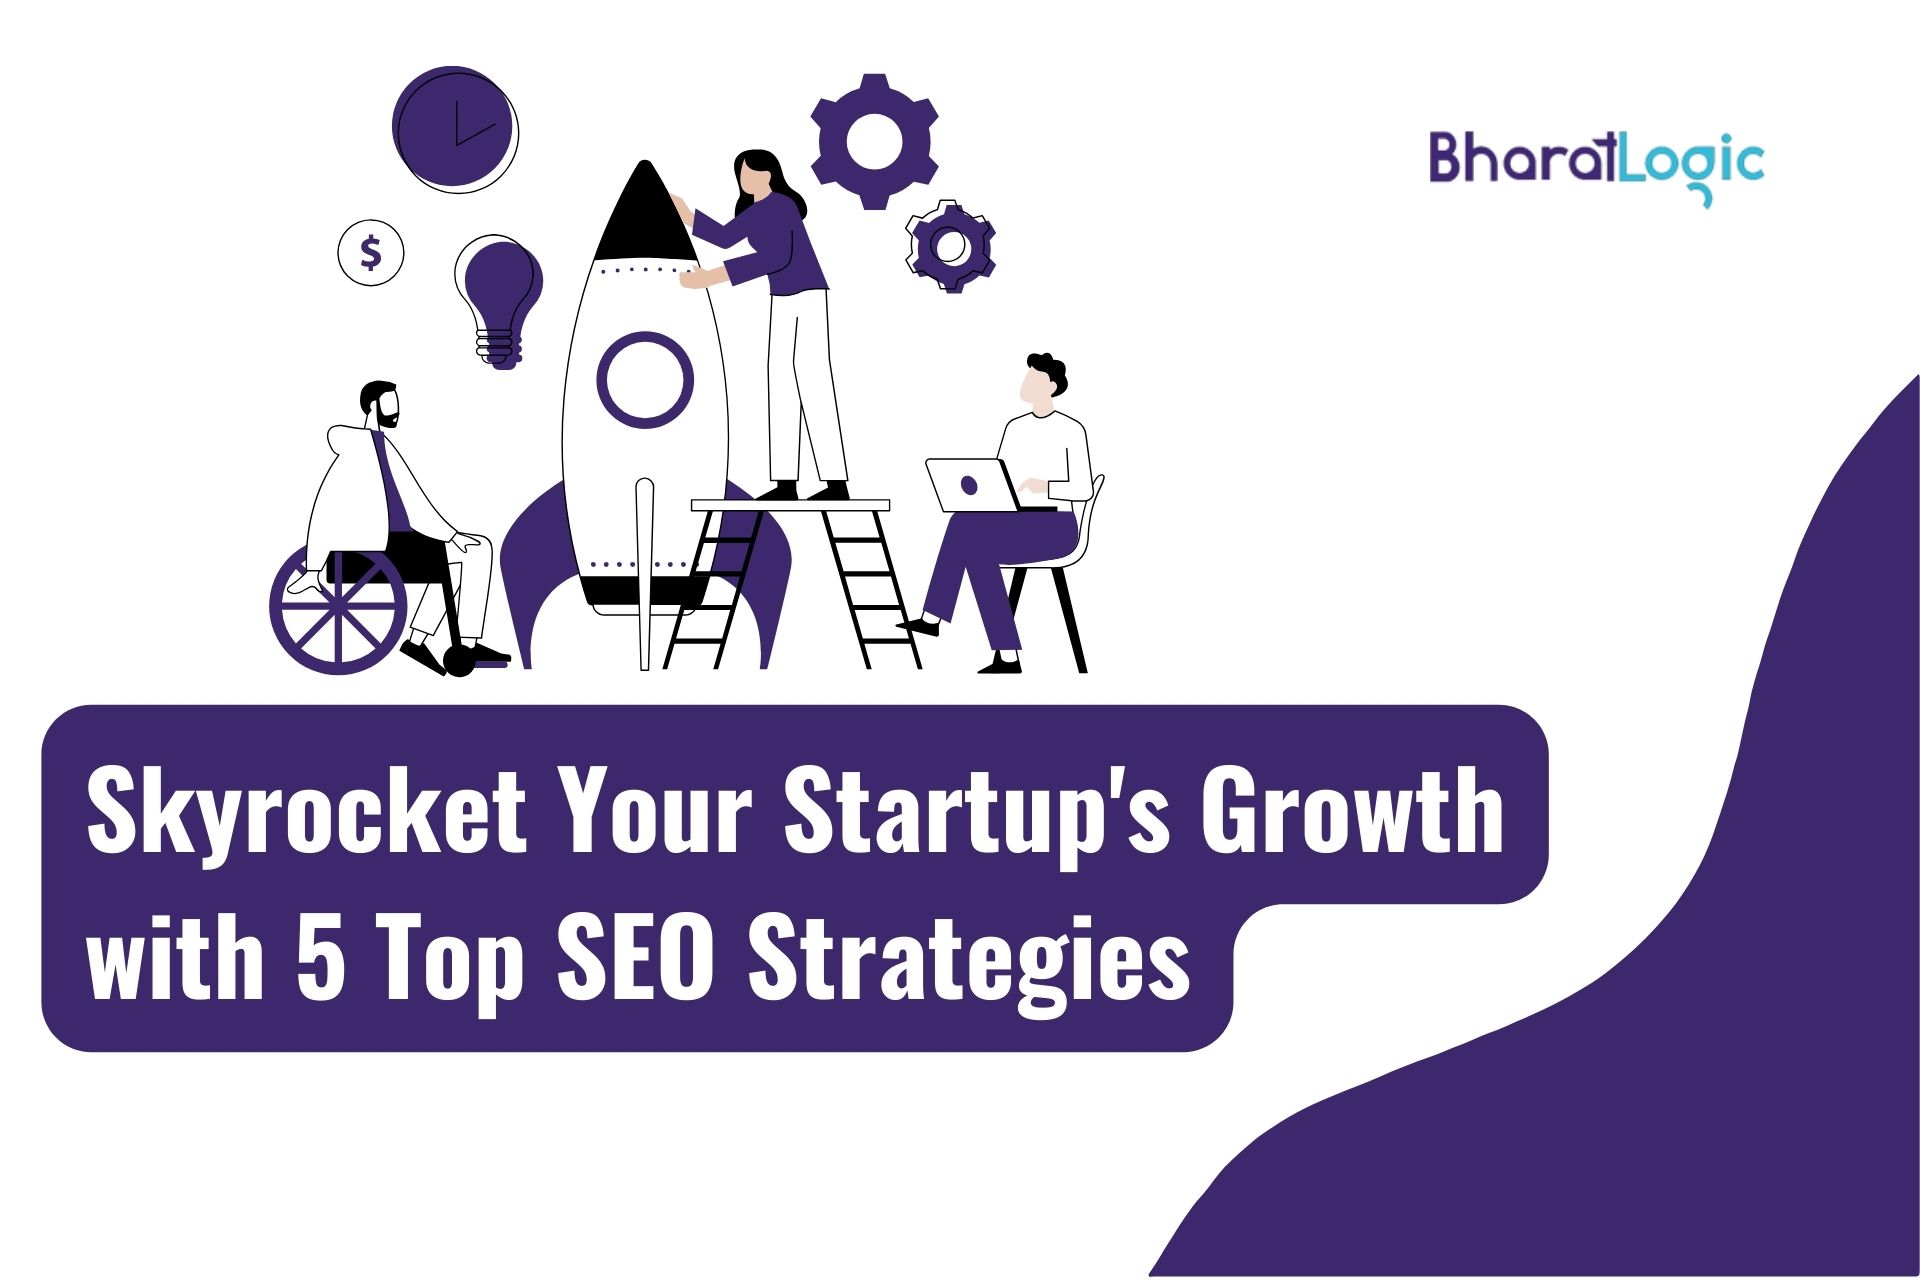 Skyrocket Your Startup's Growth with 5 Top SEO Strategies